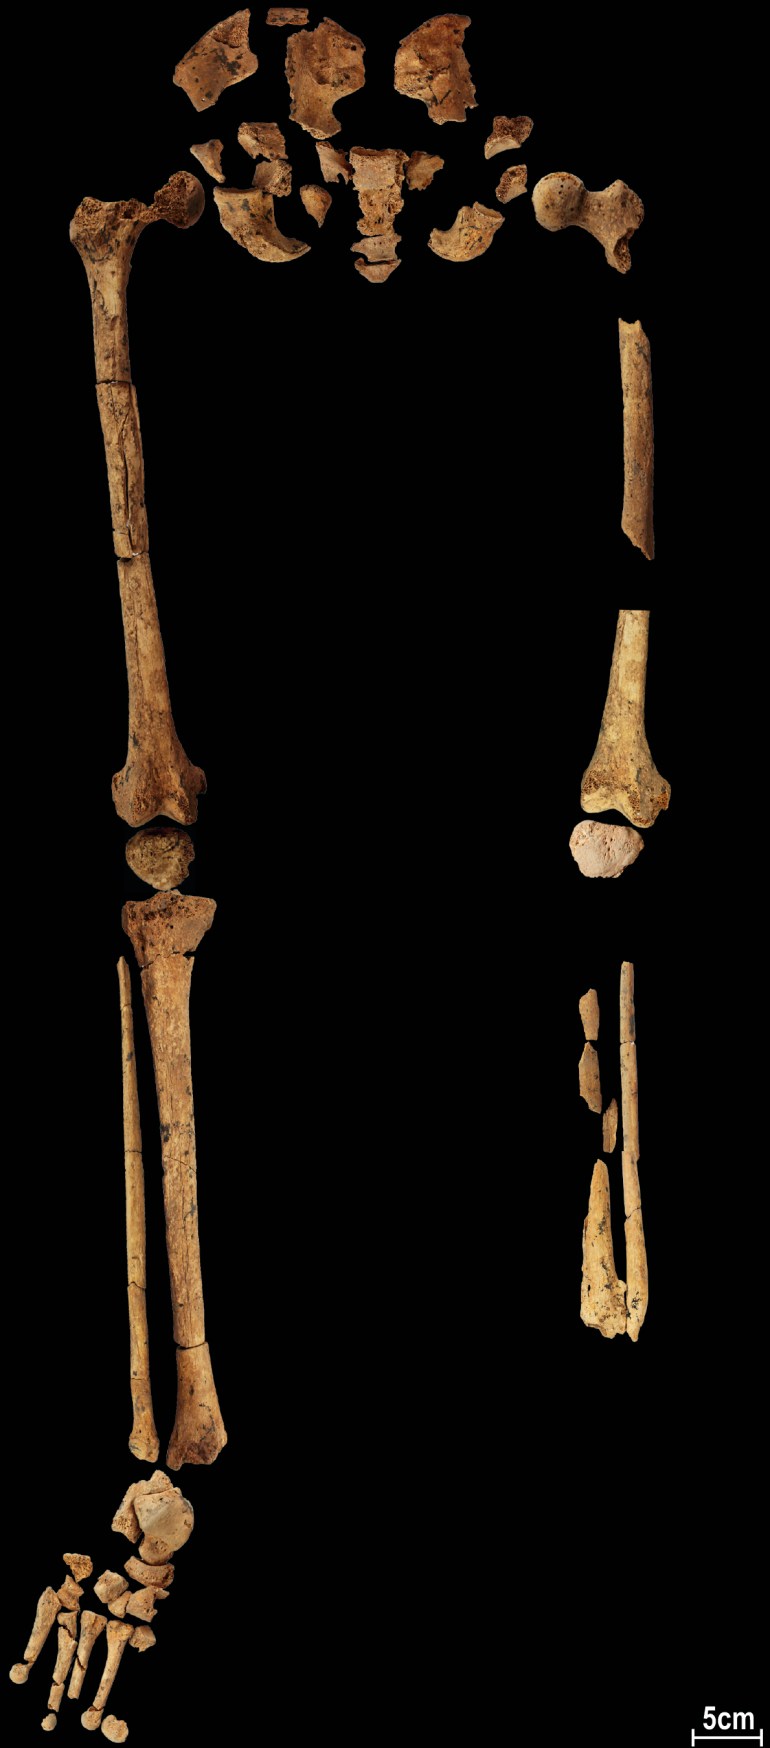 The skeleton's leg bones placed against a black background to show the clean amputation of the left foot and lower leg